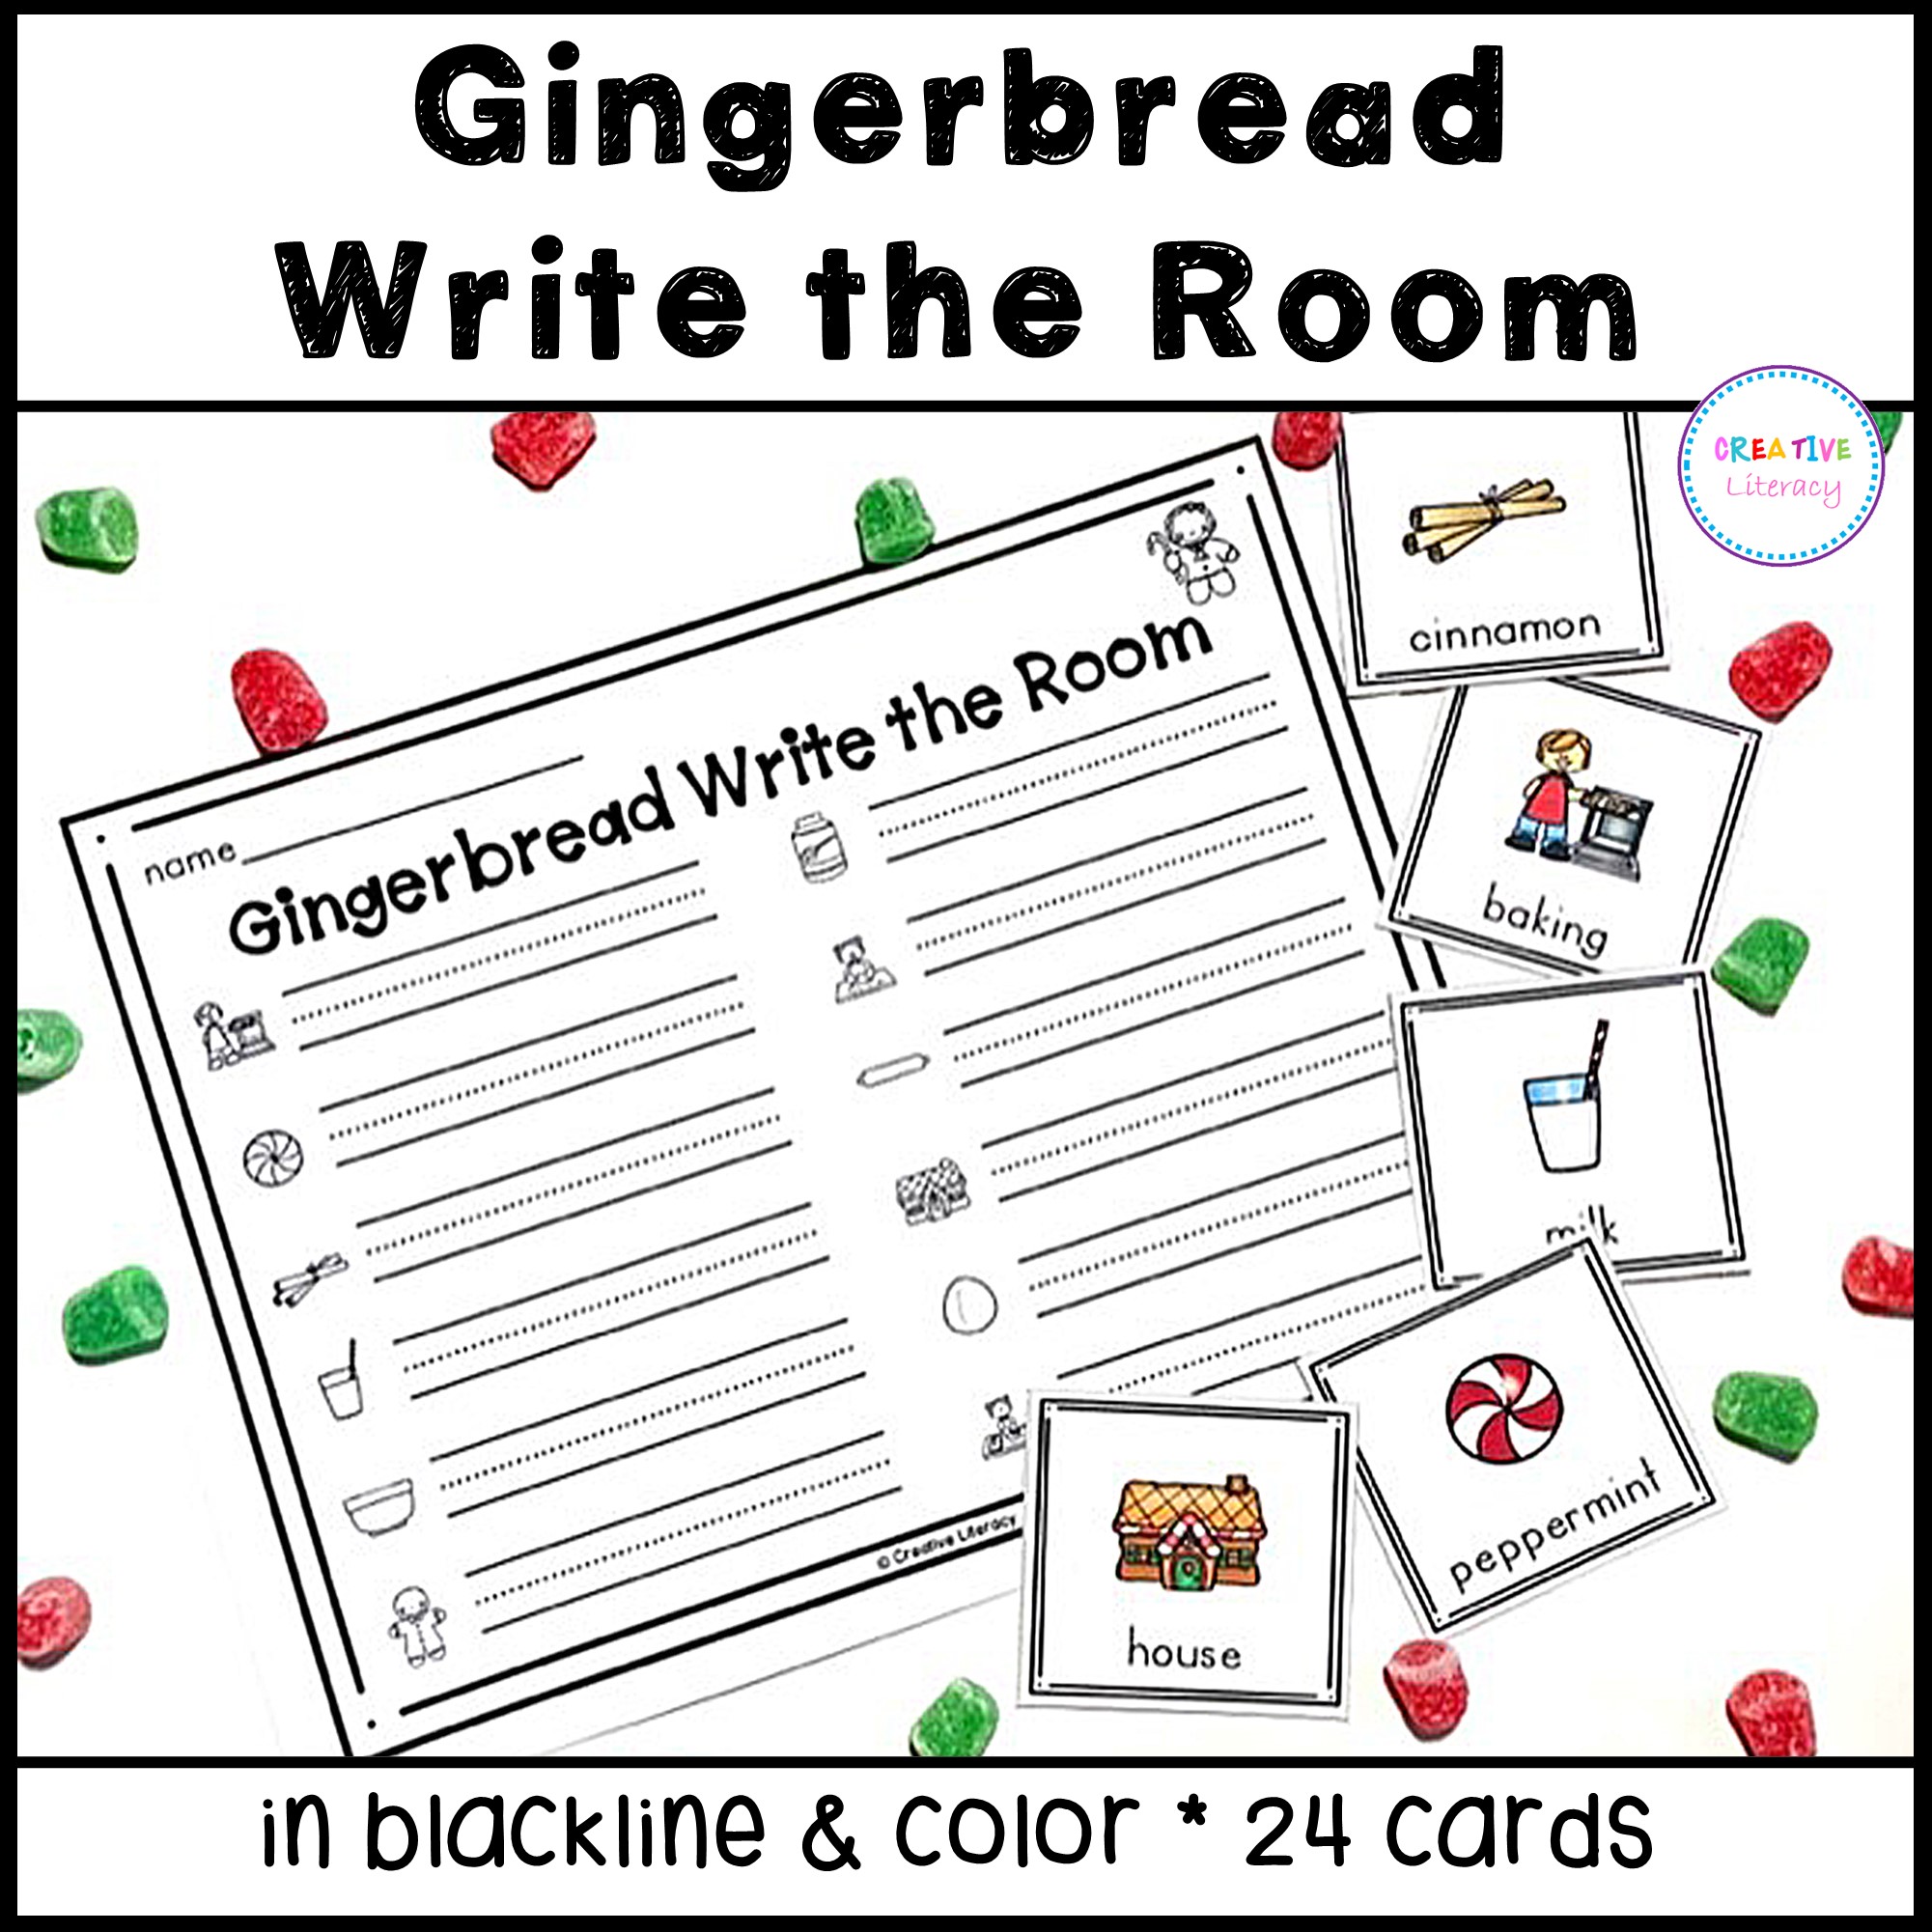 Gingerbread Write the Room Activity